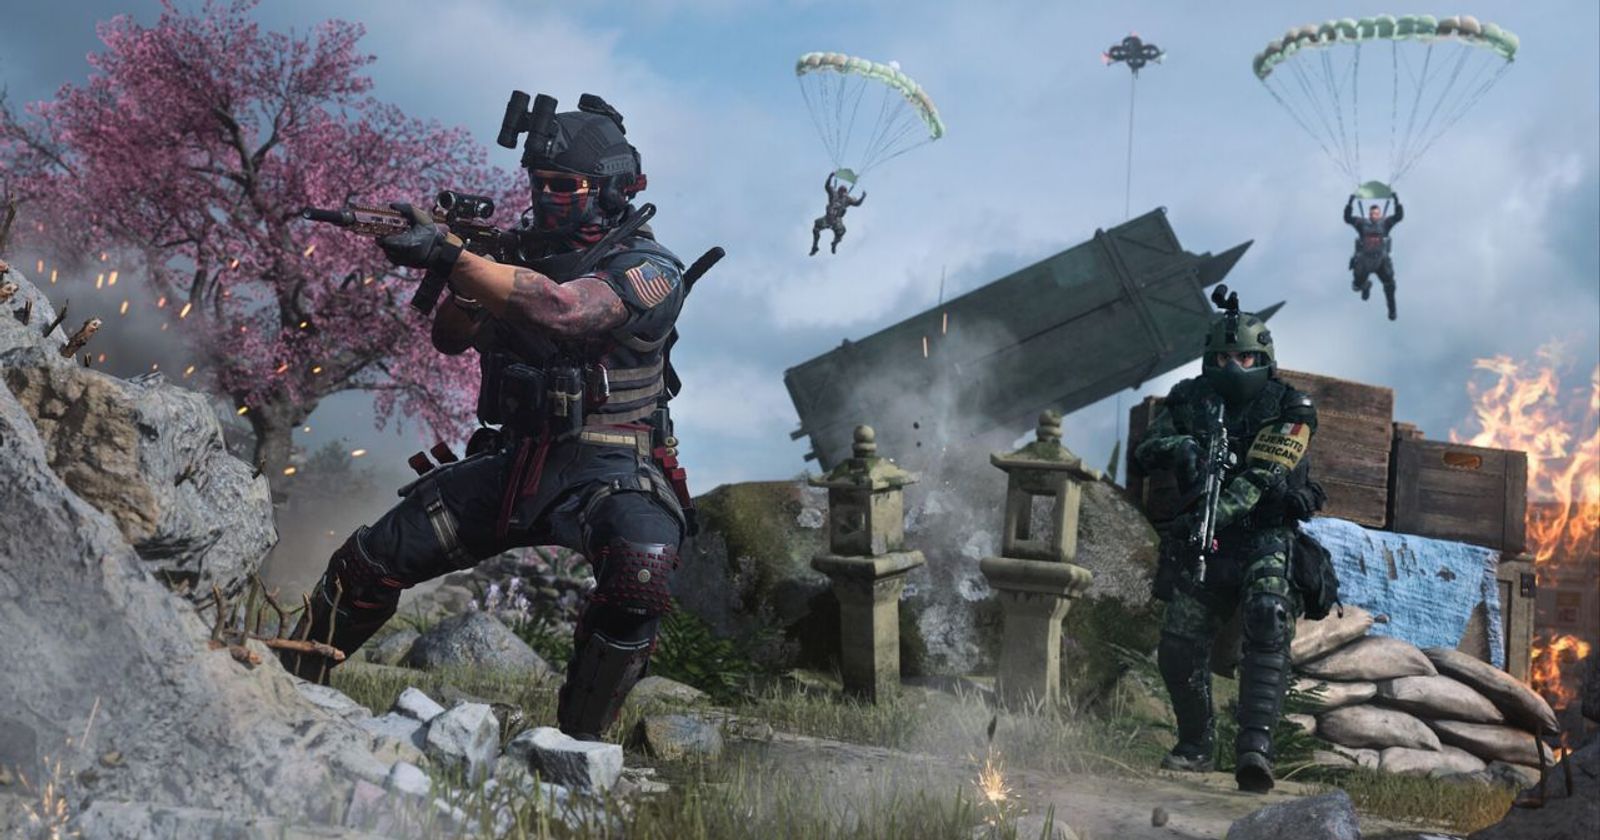 Call of Duty Modern Warfare 3 Beta: dates, platforms, and how to get in -  Meristation